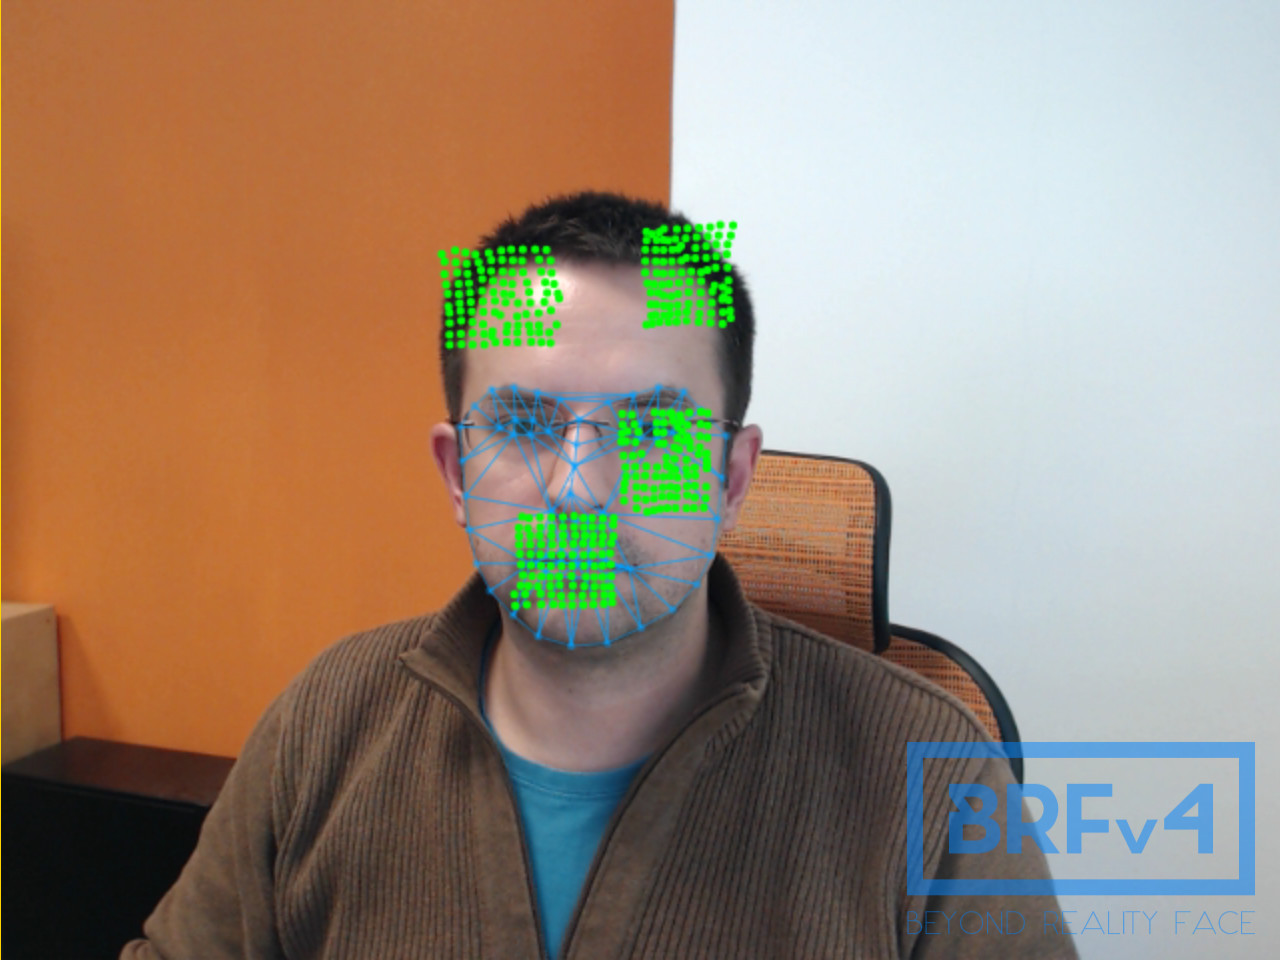 Track it simultaneously with face tracking.